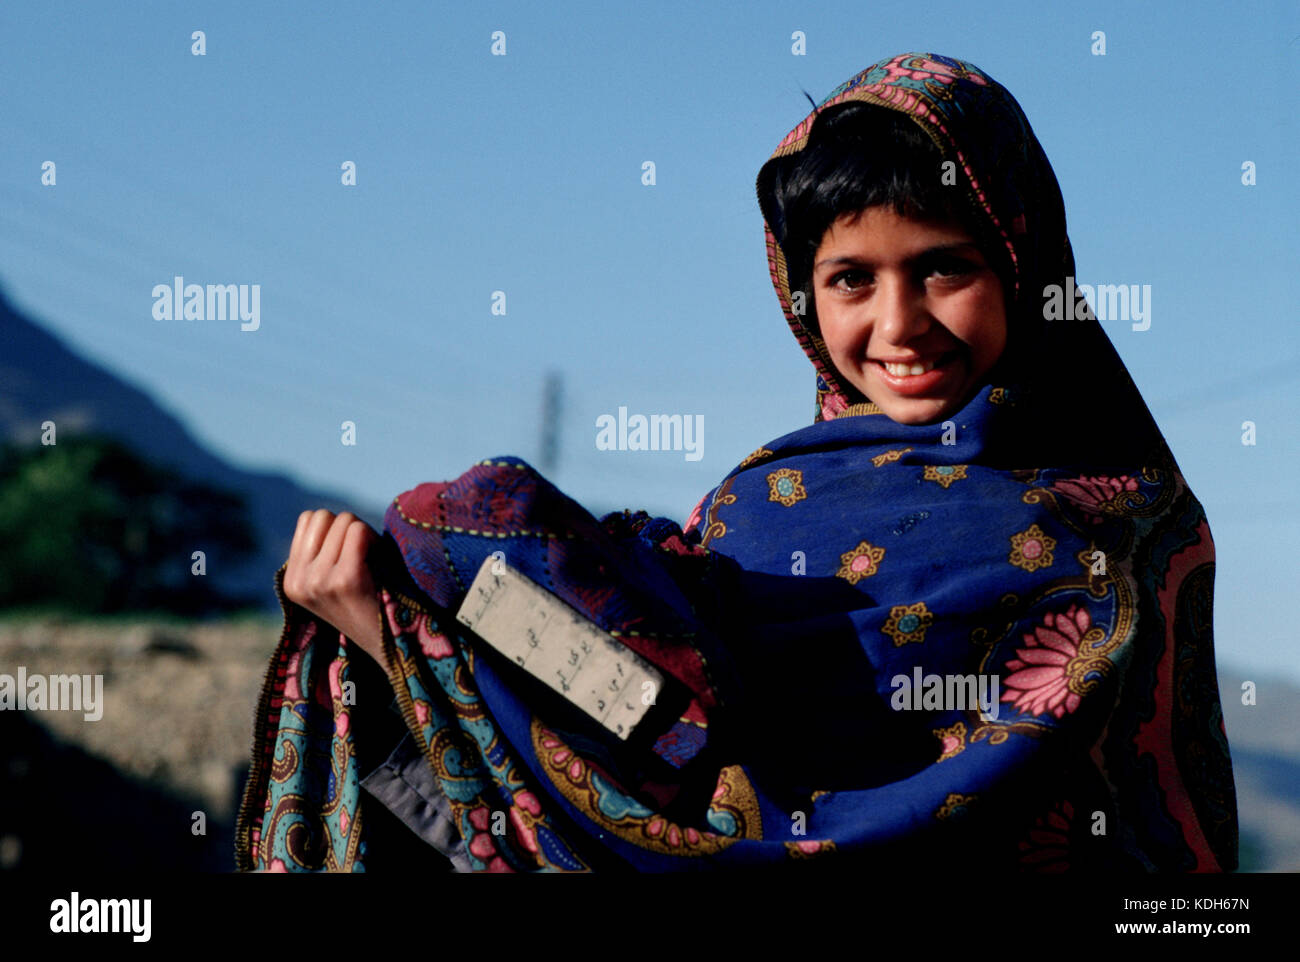 A young girl returning from school in the Swat Valley, Pakistan, 1990. Stock Photo